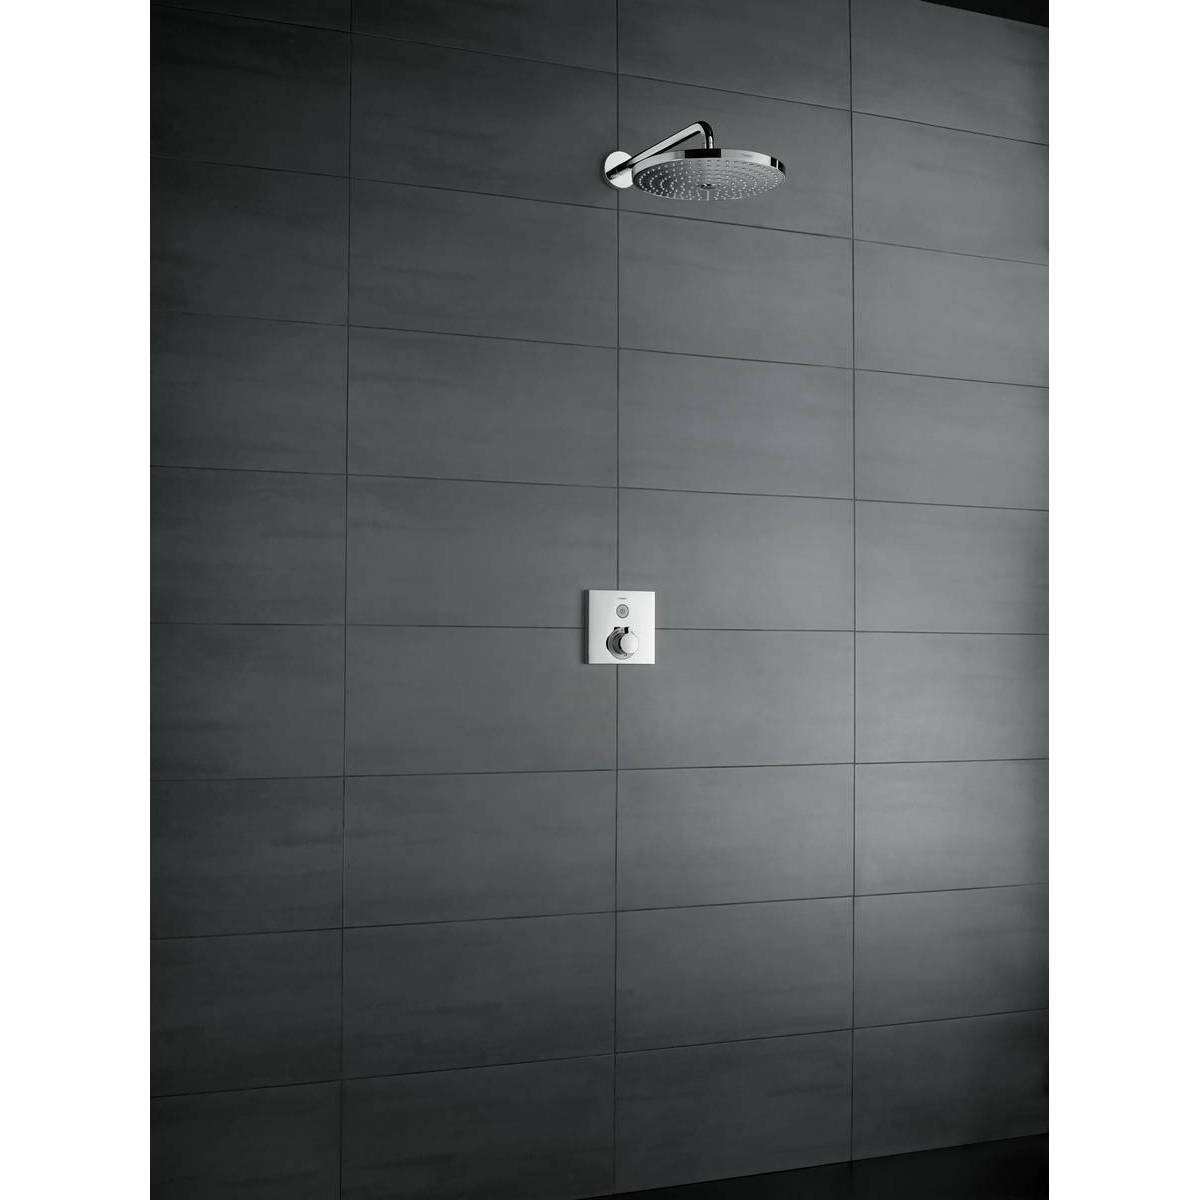 Shower Select Thermostatic Mixer For Concealed For 1 Outlet (Including Concealed fittings 01800180 i-Box),Bathroom Mixers,Hansgrohe,Haji Gallery.